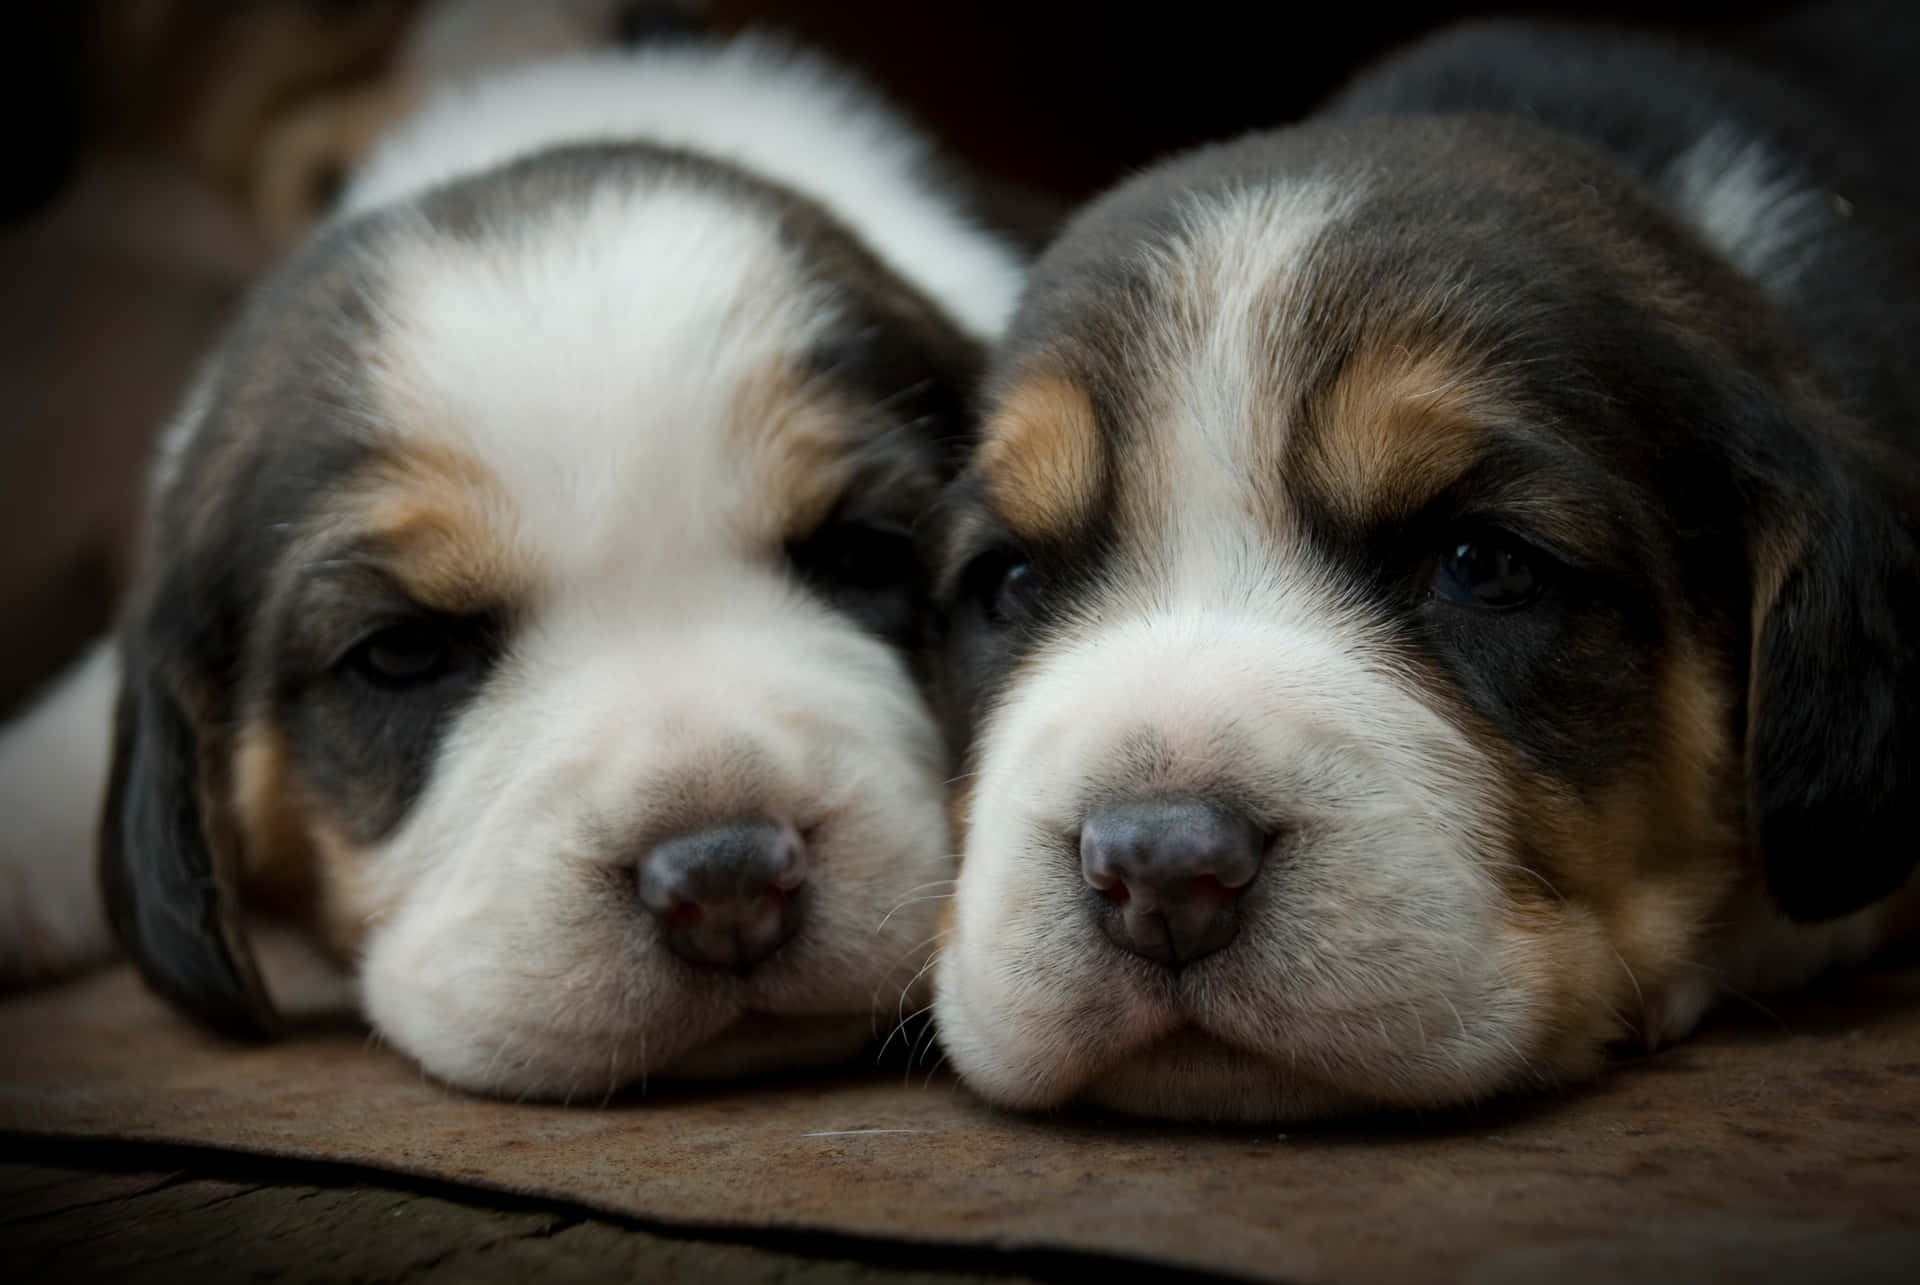 Puppy love - these cute puppies are sure to make your day brighter